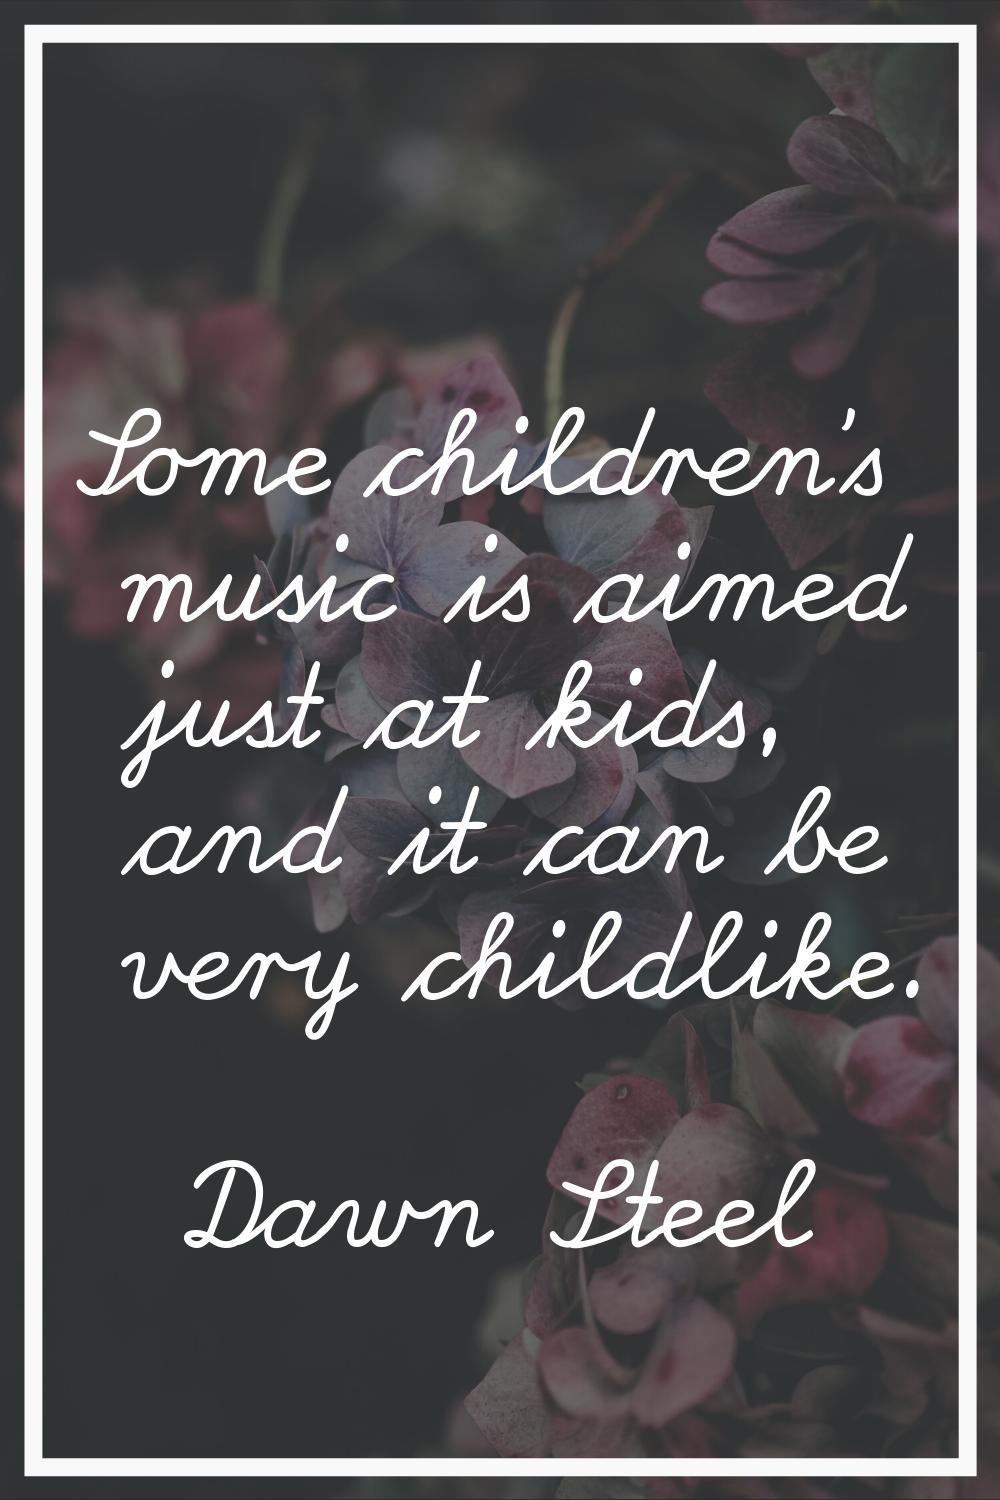 Some children's music is aimed just at kids, and it can be very childlike.